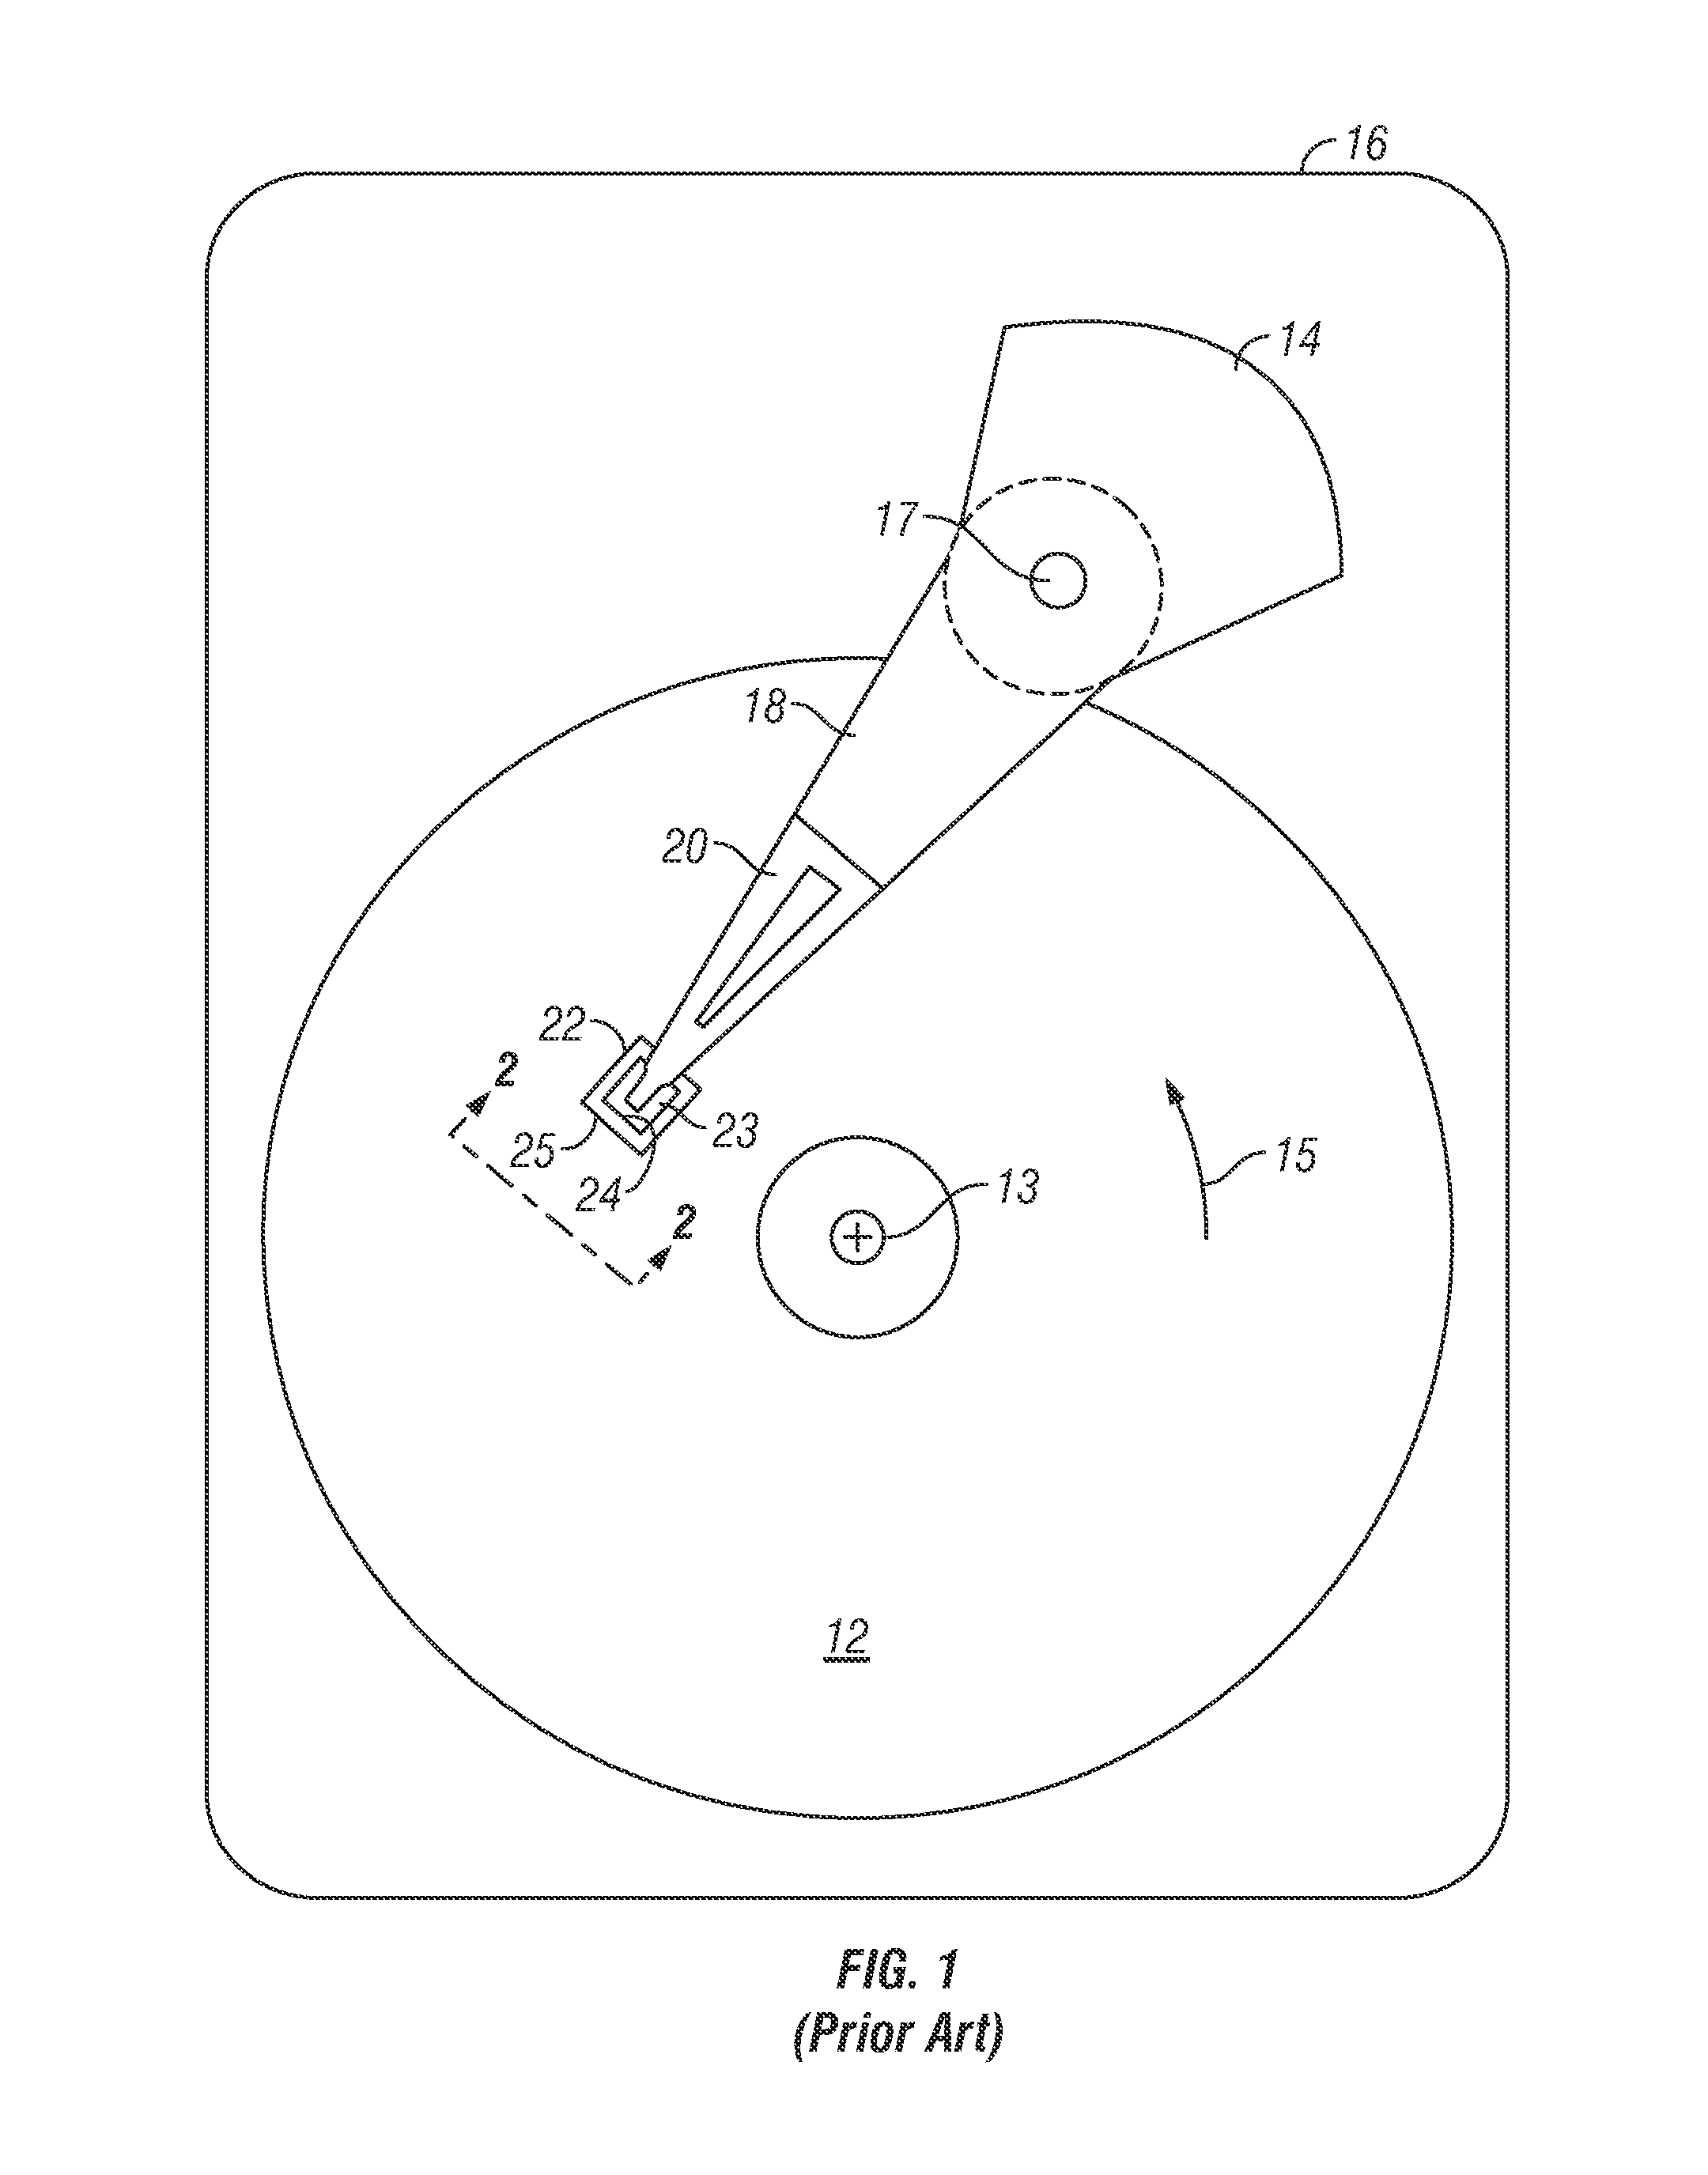 Method for making a current-perpendicular-to-the-plane (CPP) magnetoresistive sensor containing a ferromagnetic alloy requiring post-deposition annealing